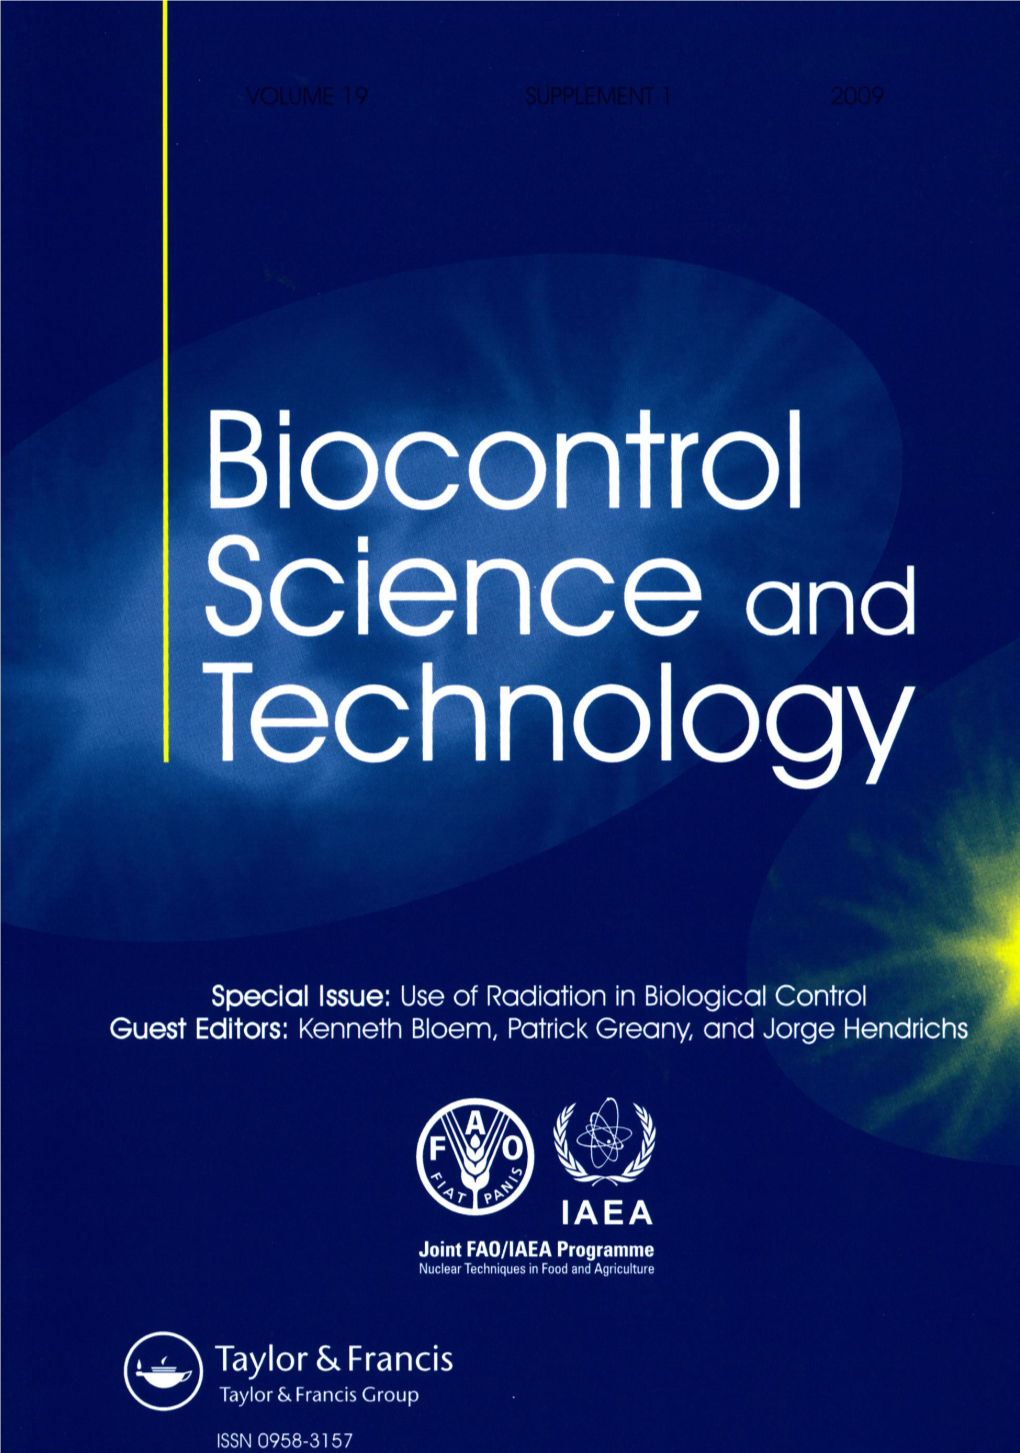 Biocontrol Science and Technology, Vol